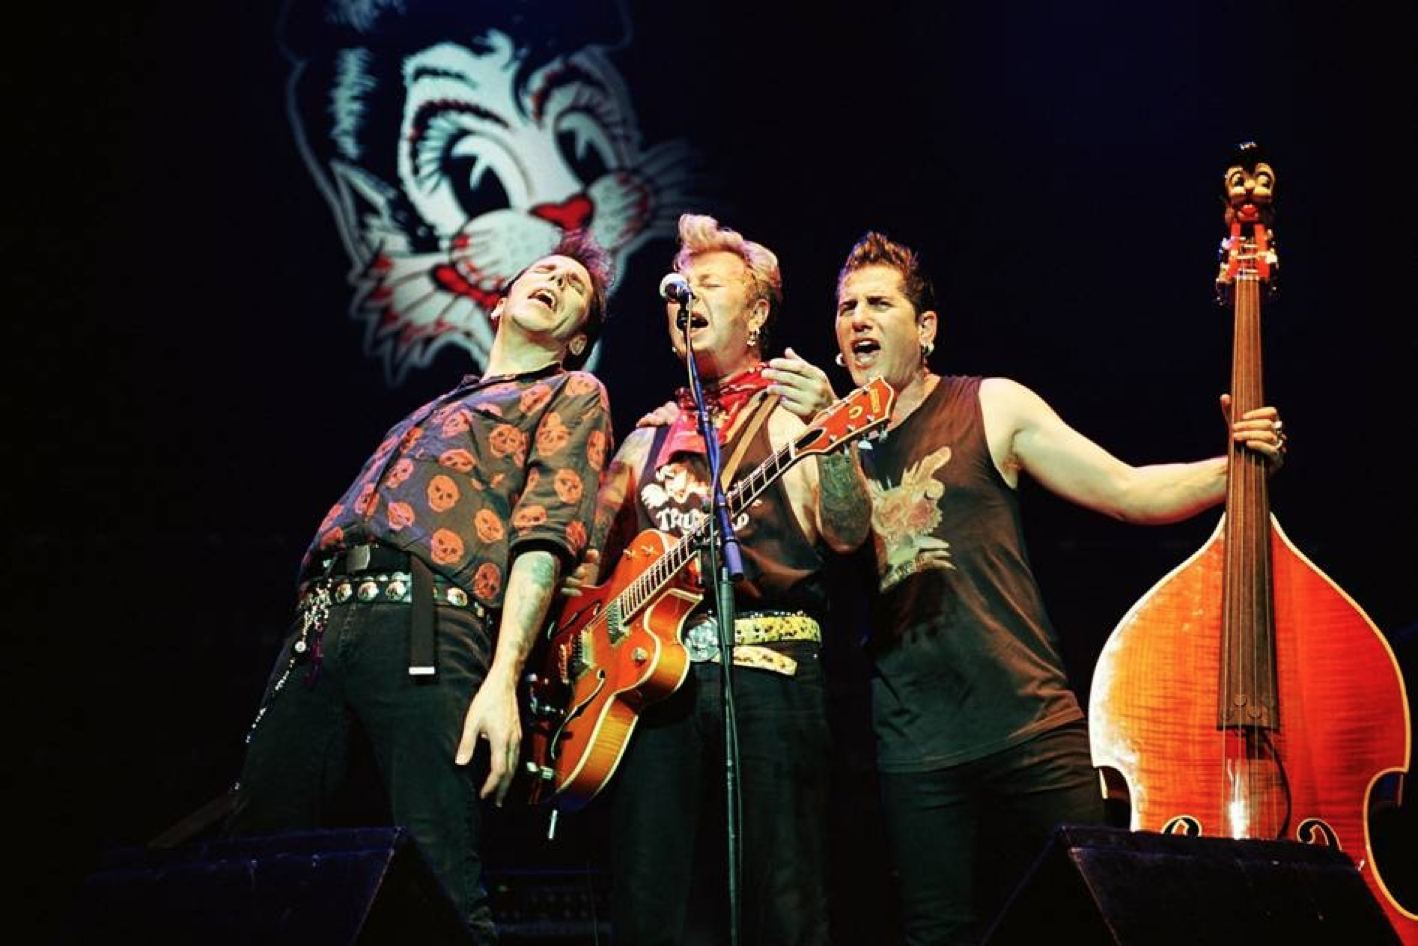 Stray Cats Reunite For First North American Performance in 10 years